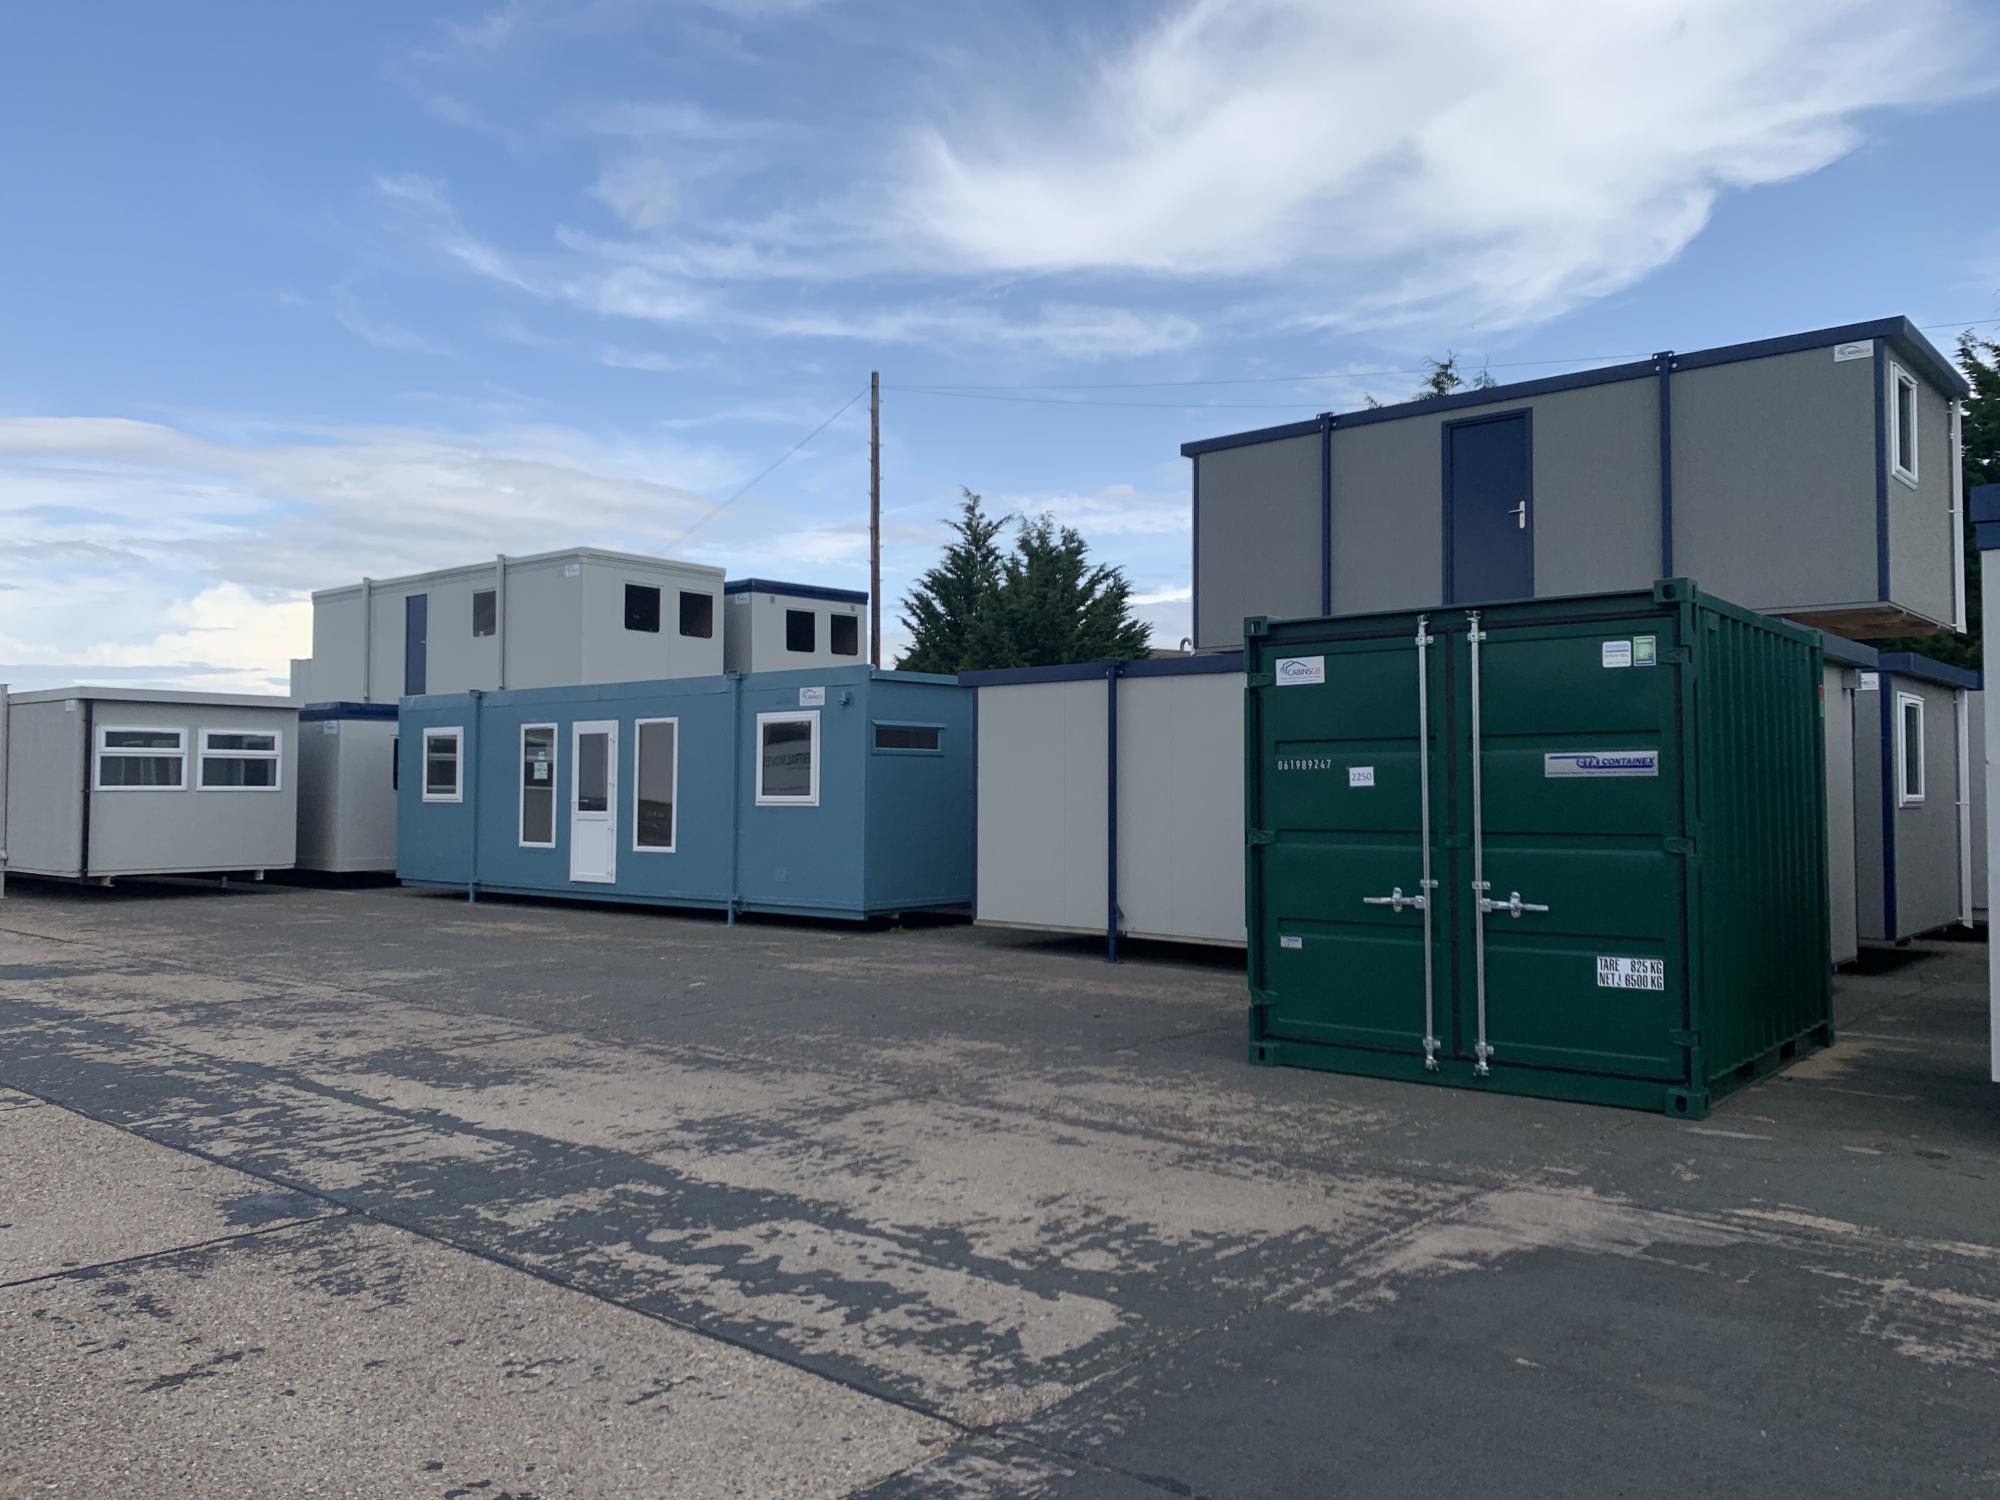 Cabins GB - New and Used Portable Cabins & Containers